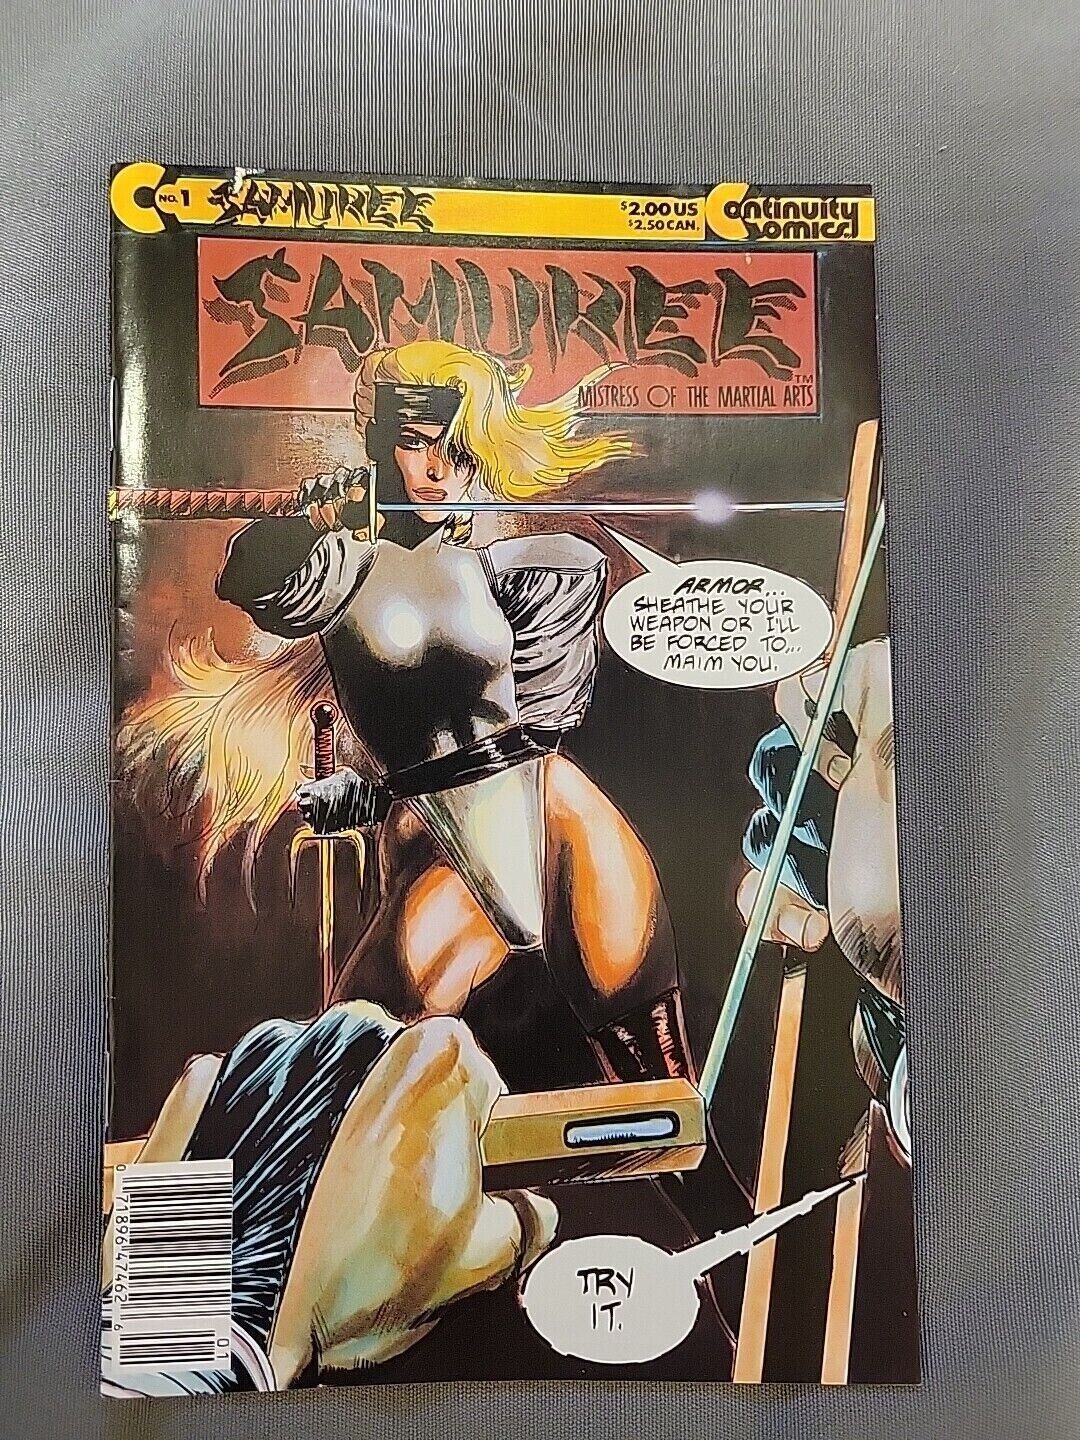 Samuree #1 (May 1987, Continuity Comics) Vintage Copper Age Comic 1st Issue